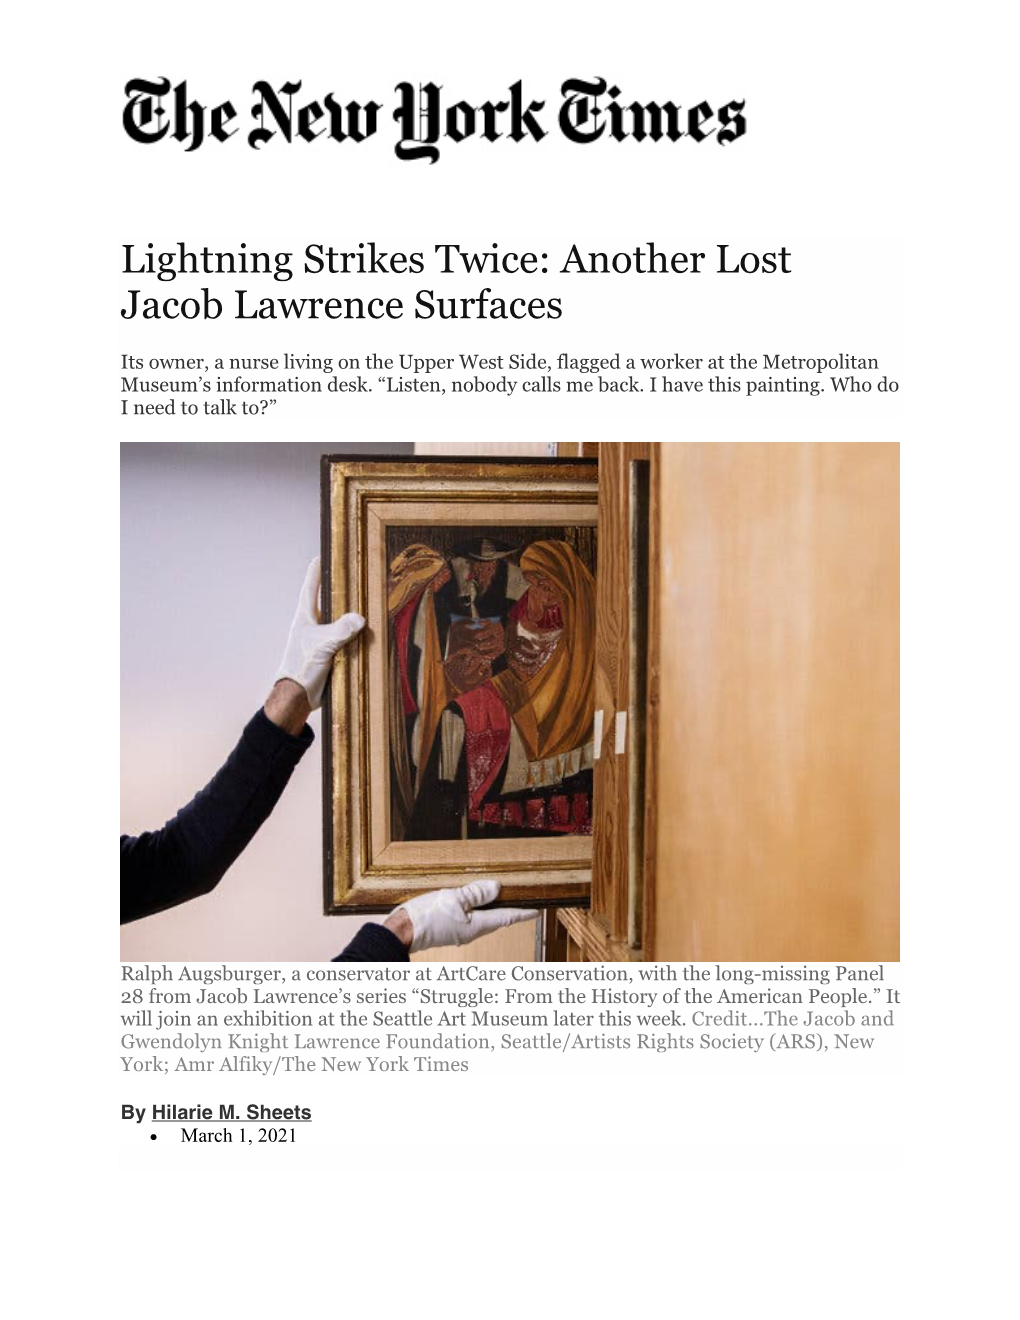 Lightning Strikes Twice: Another Lost Jacob Lawrence Surfaces